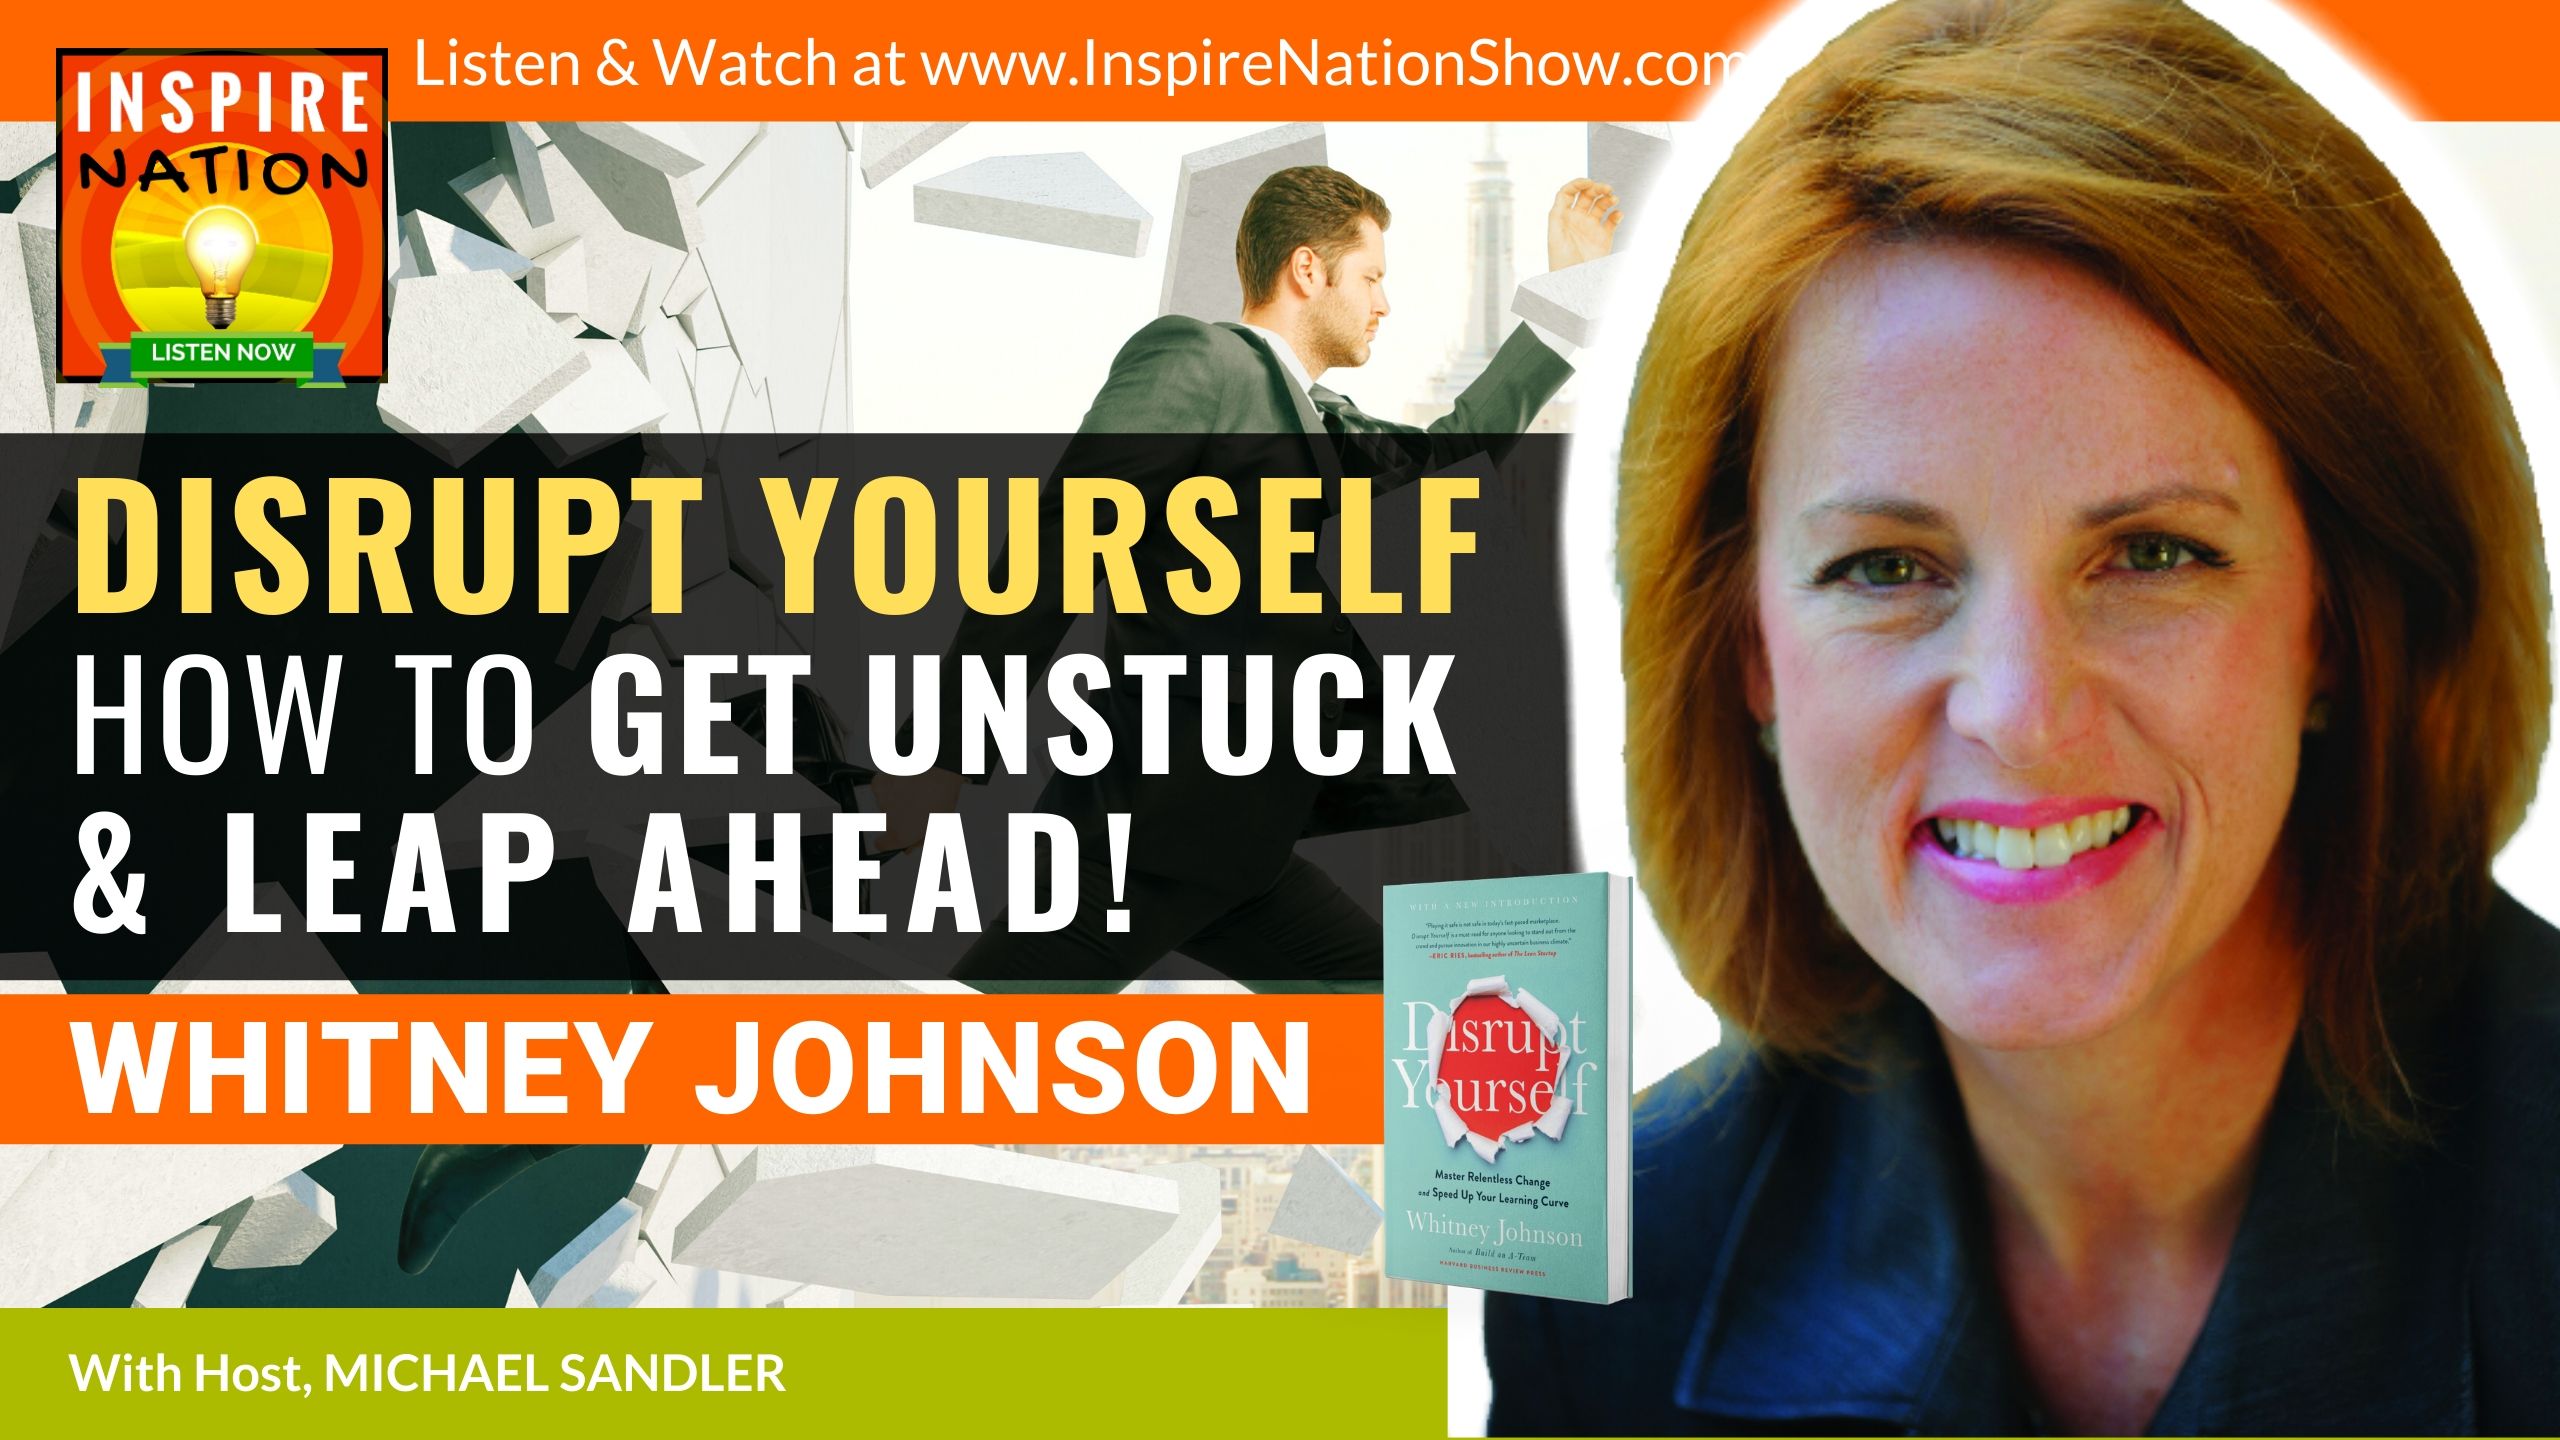 Michael Sandler interviews Whitney Johnson on how to Disrupt Yourself, Get Unstuck & Leap Ahead!